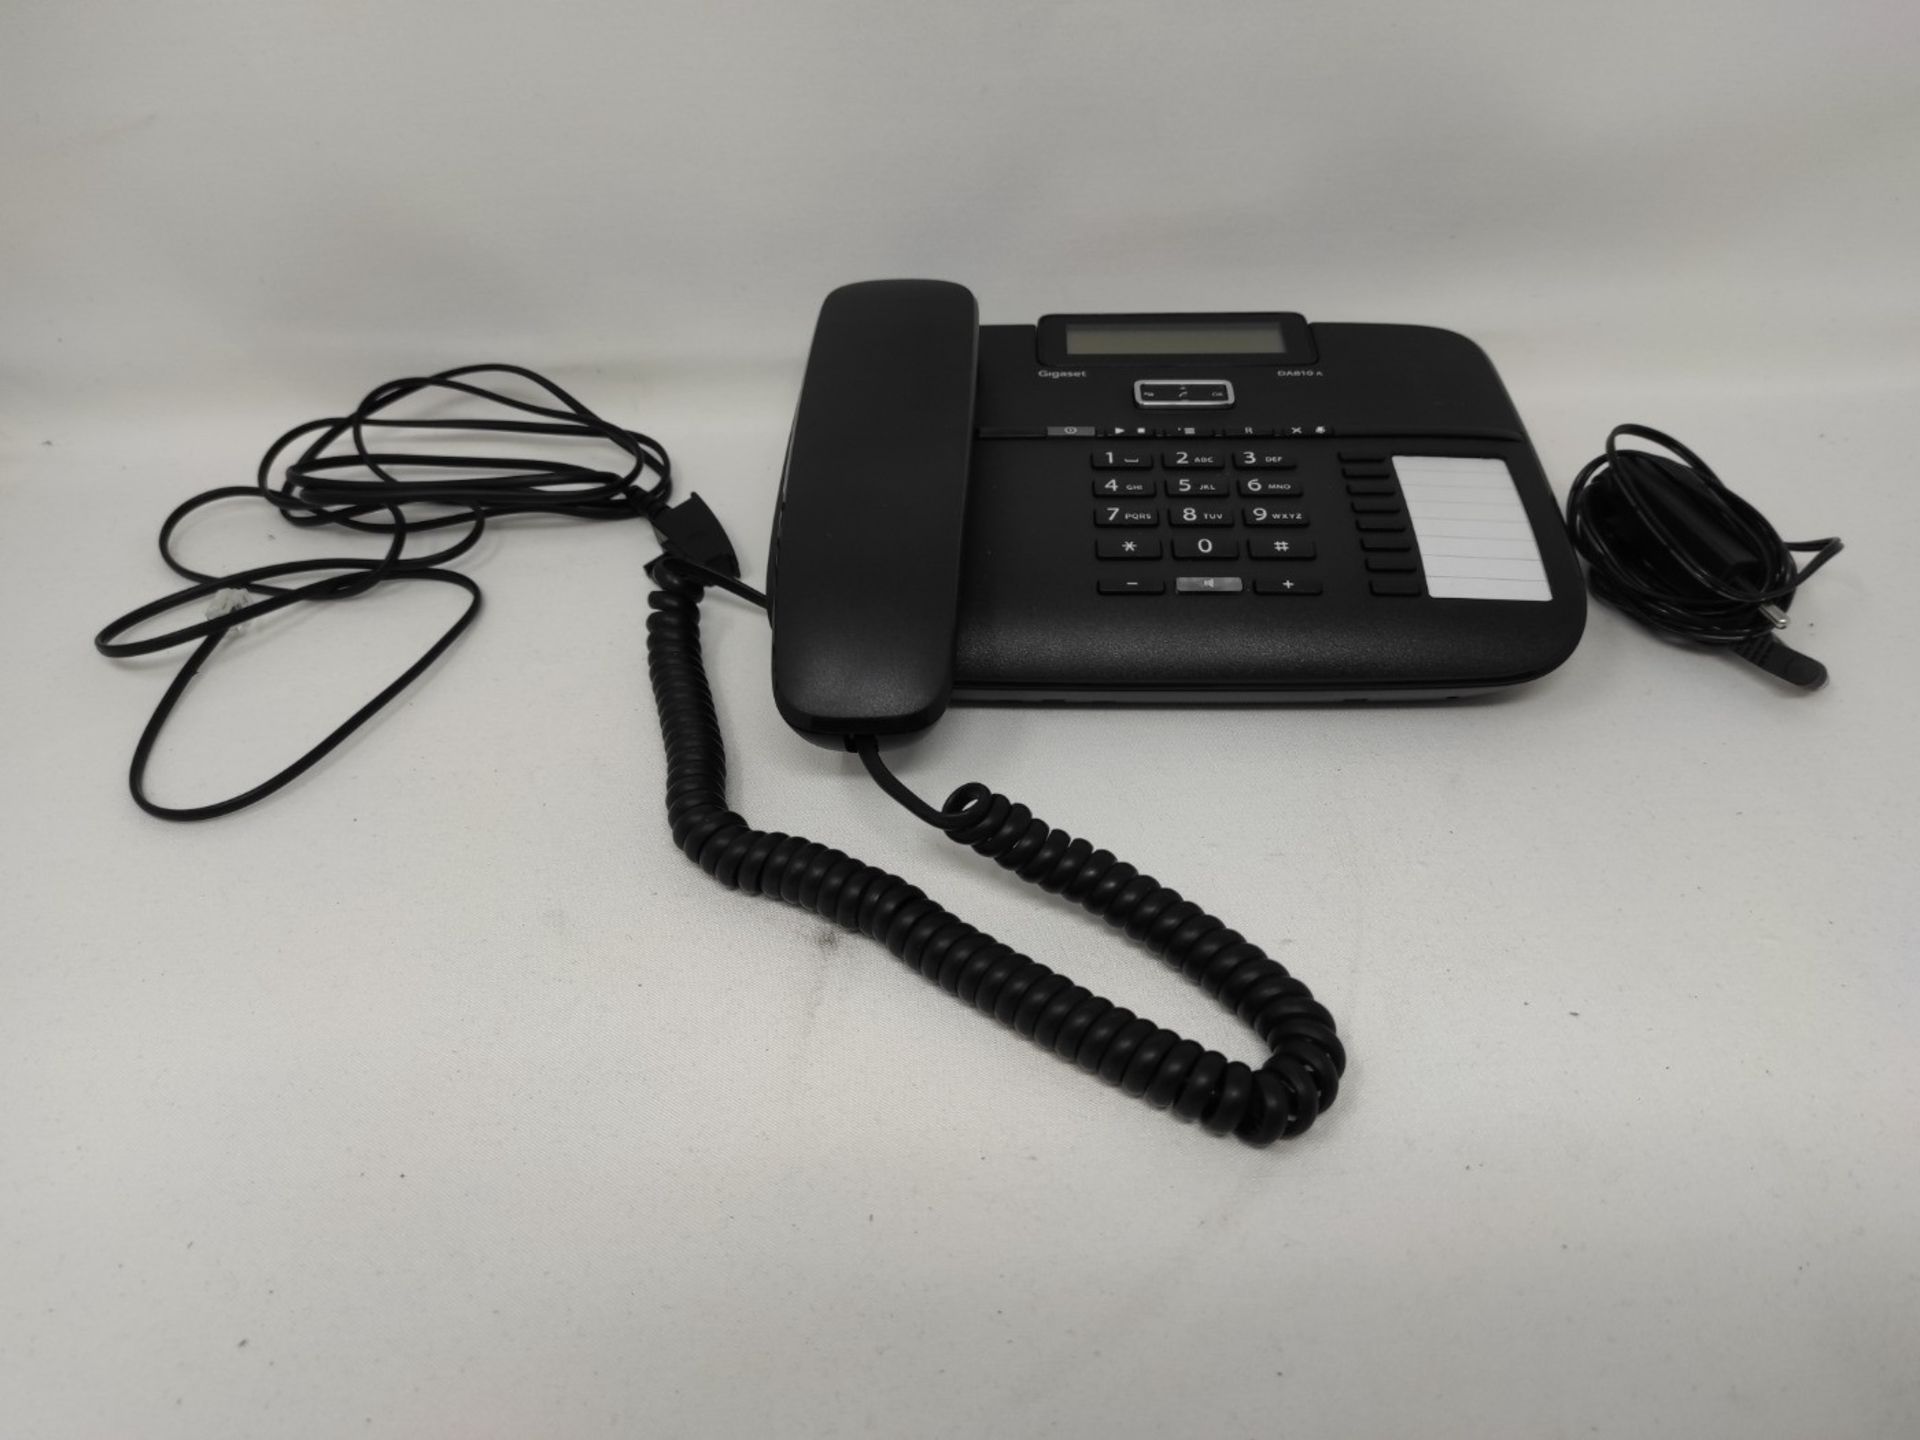 Gigaset DA810A - corded telephone with answering machine and hands-free function - fol - Image 3 of 3